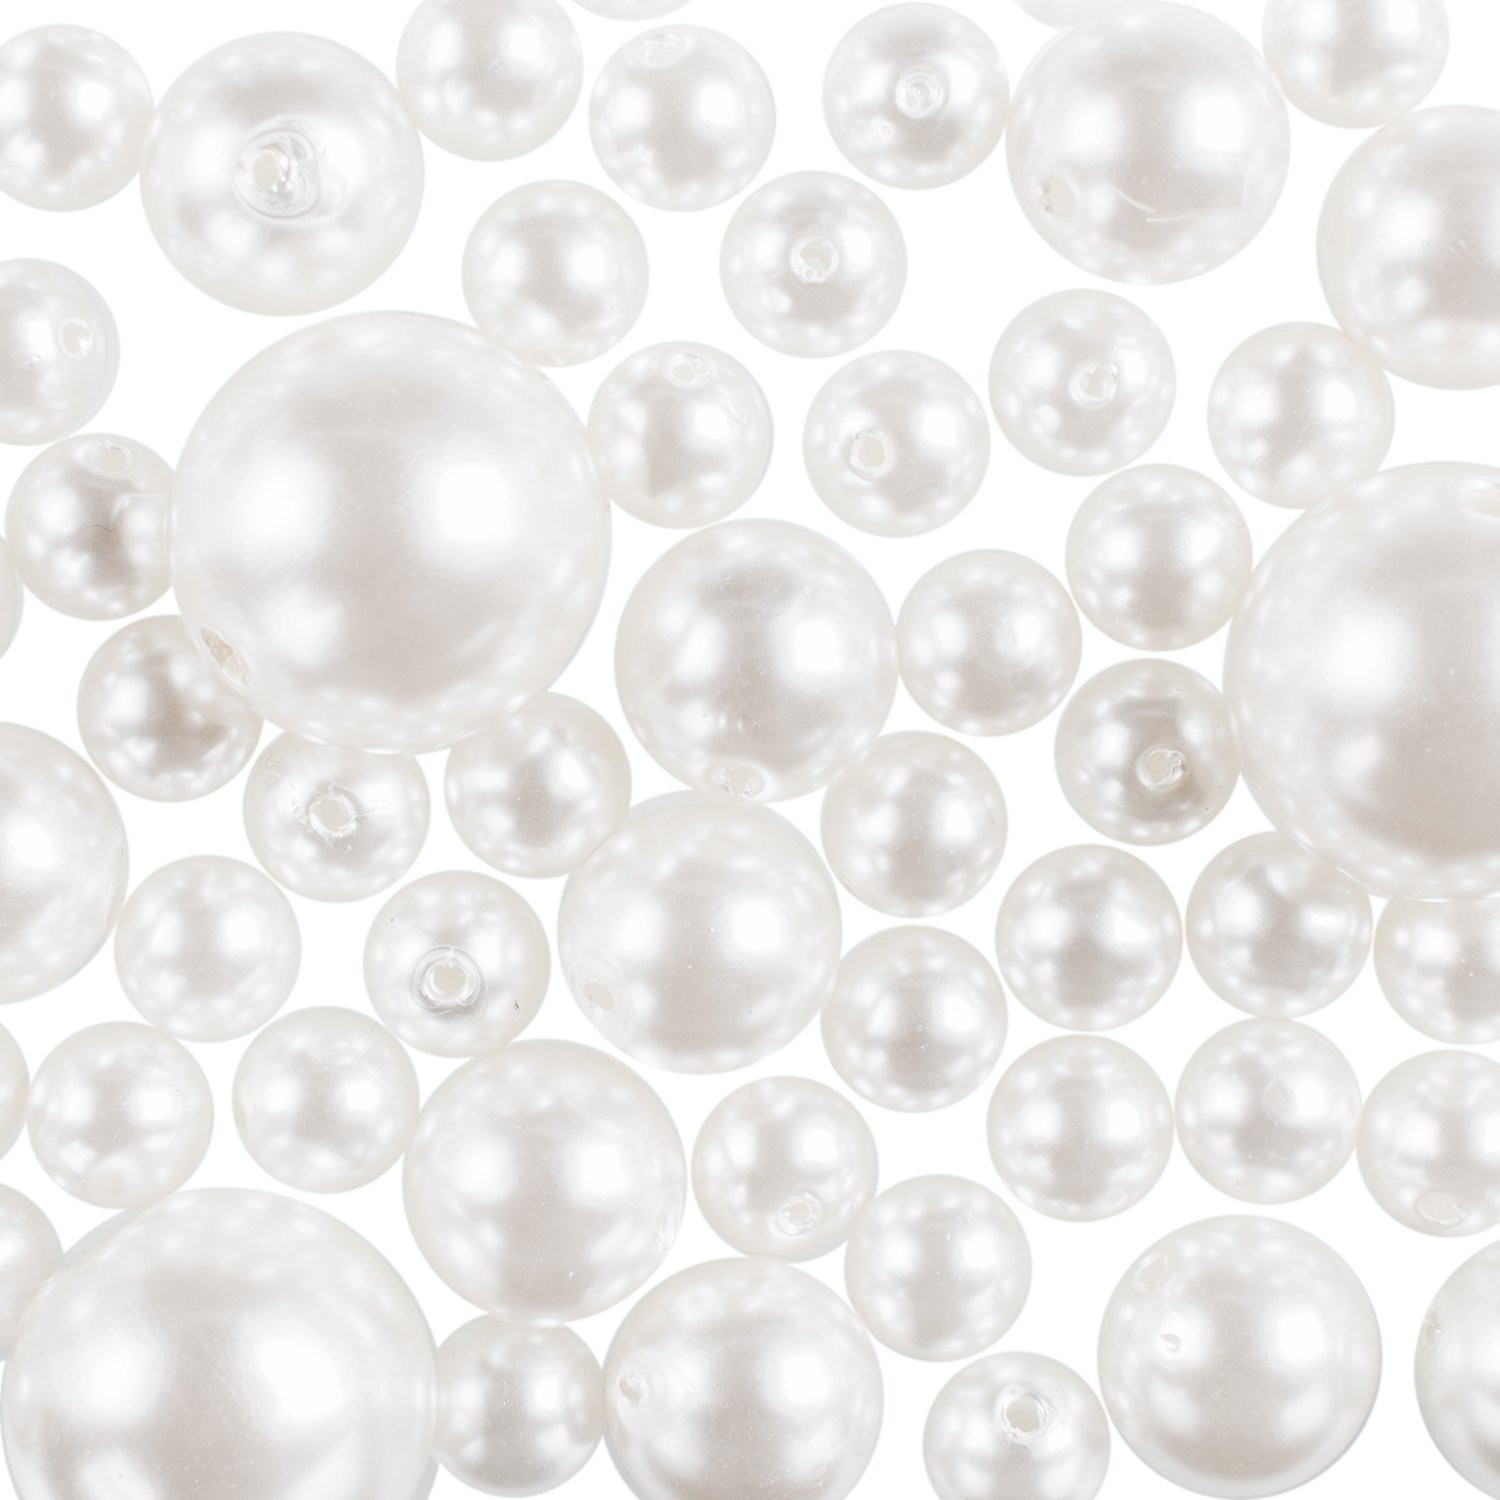 29 Lovable Clear Plastic Beads for Vases 2024 free download clear plastic beads for vases of best floating pearls for centerpieces amazon com with elegant glossy polished pearl beads for vase fillers diy jewelry necklaces table scatter wedding birthd